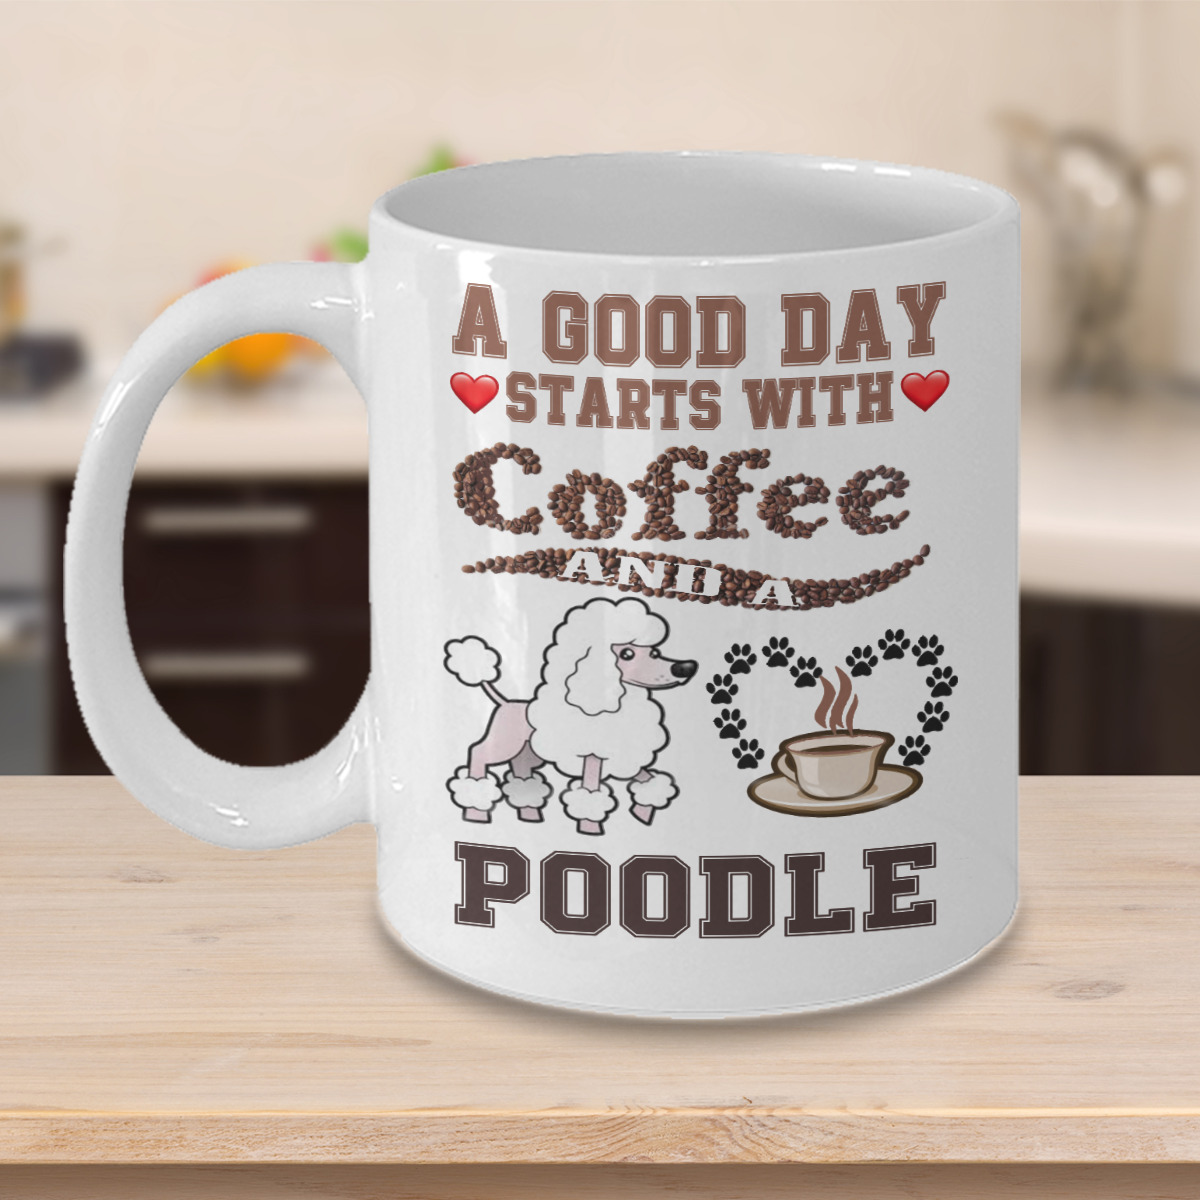 Poodles Dog,Standard Poodle,Gift Dog,Pudelhund,Caniche,Poodle,Cup,Coffee Mugs